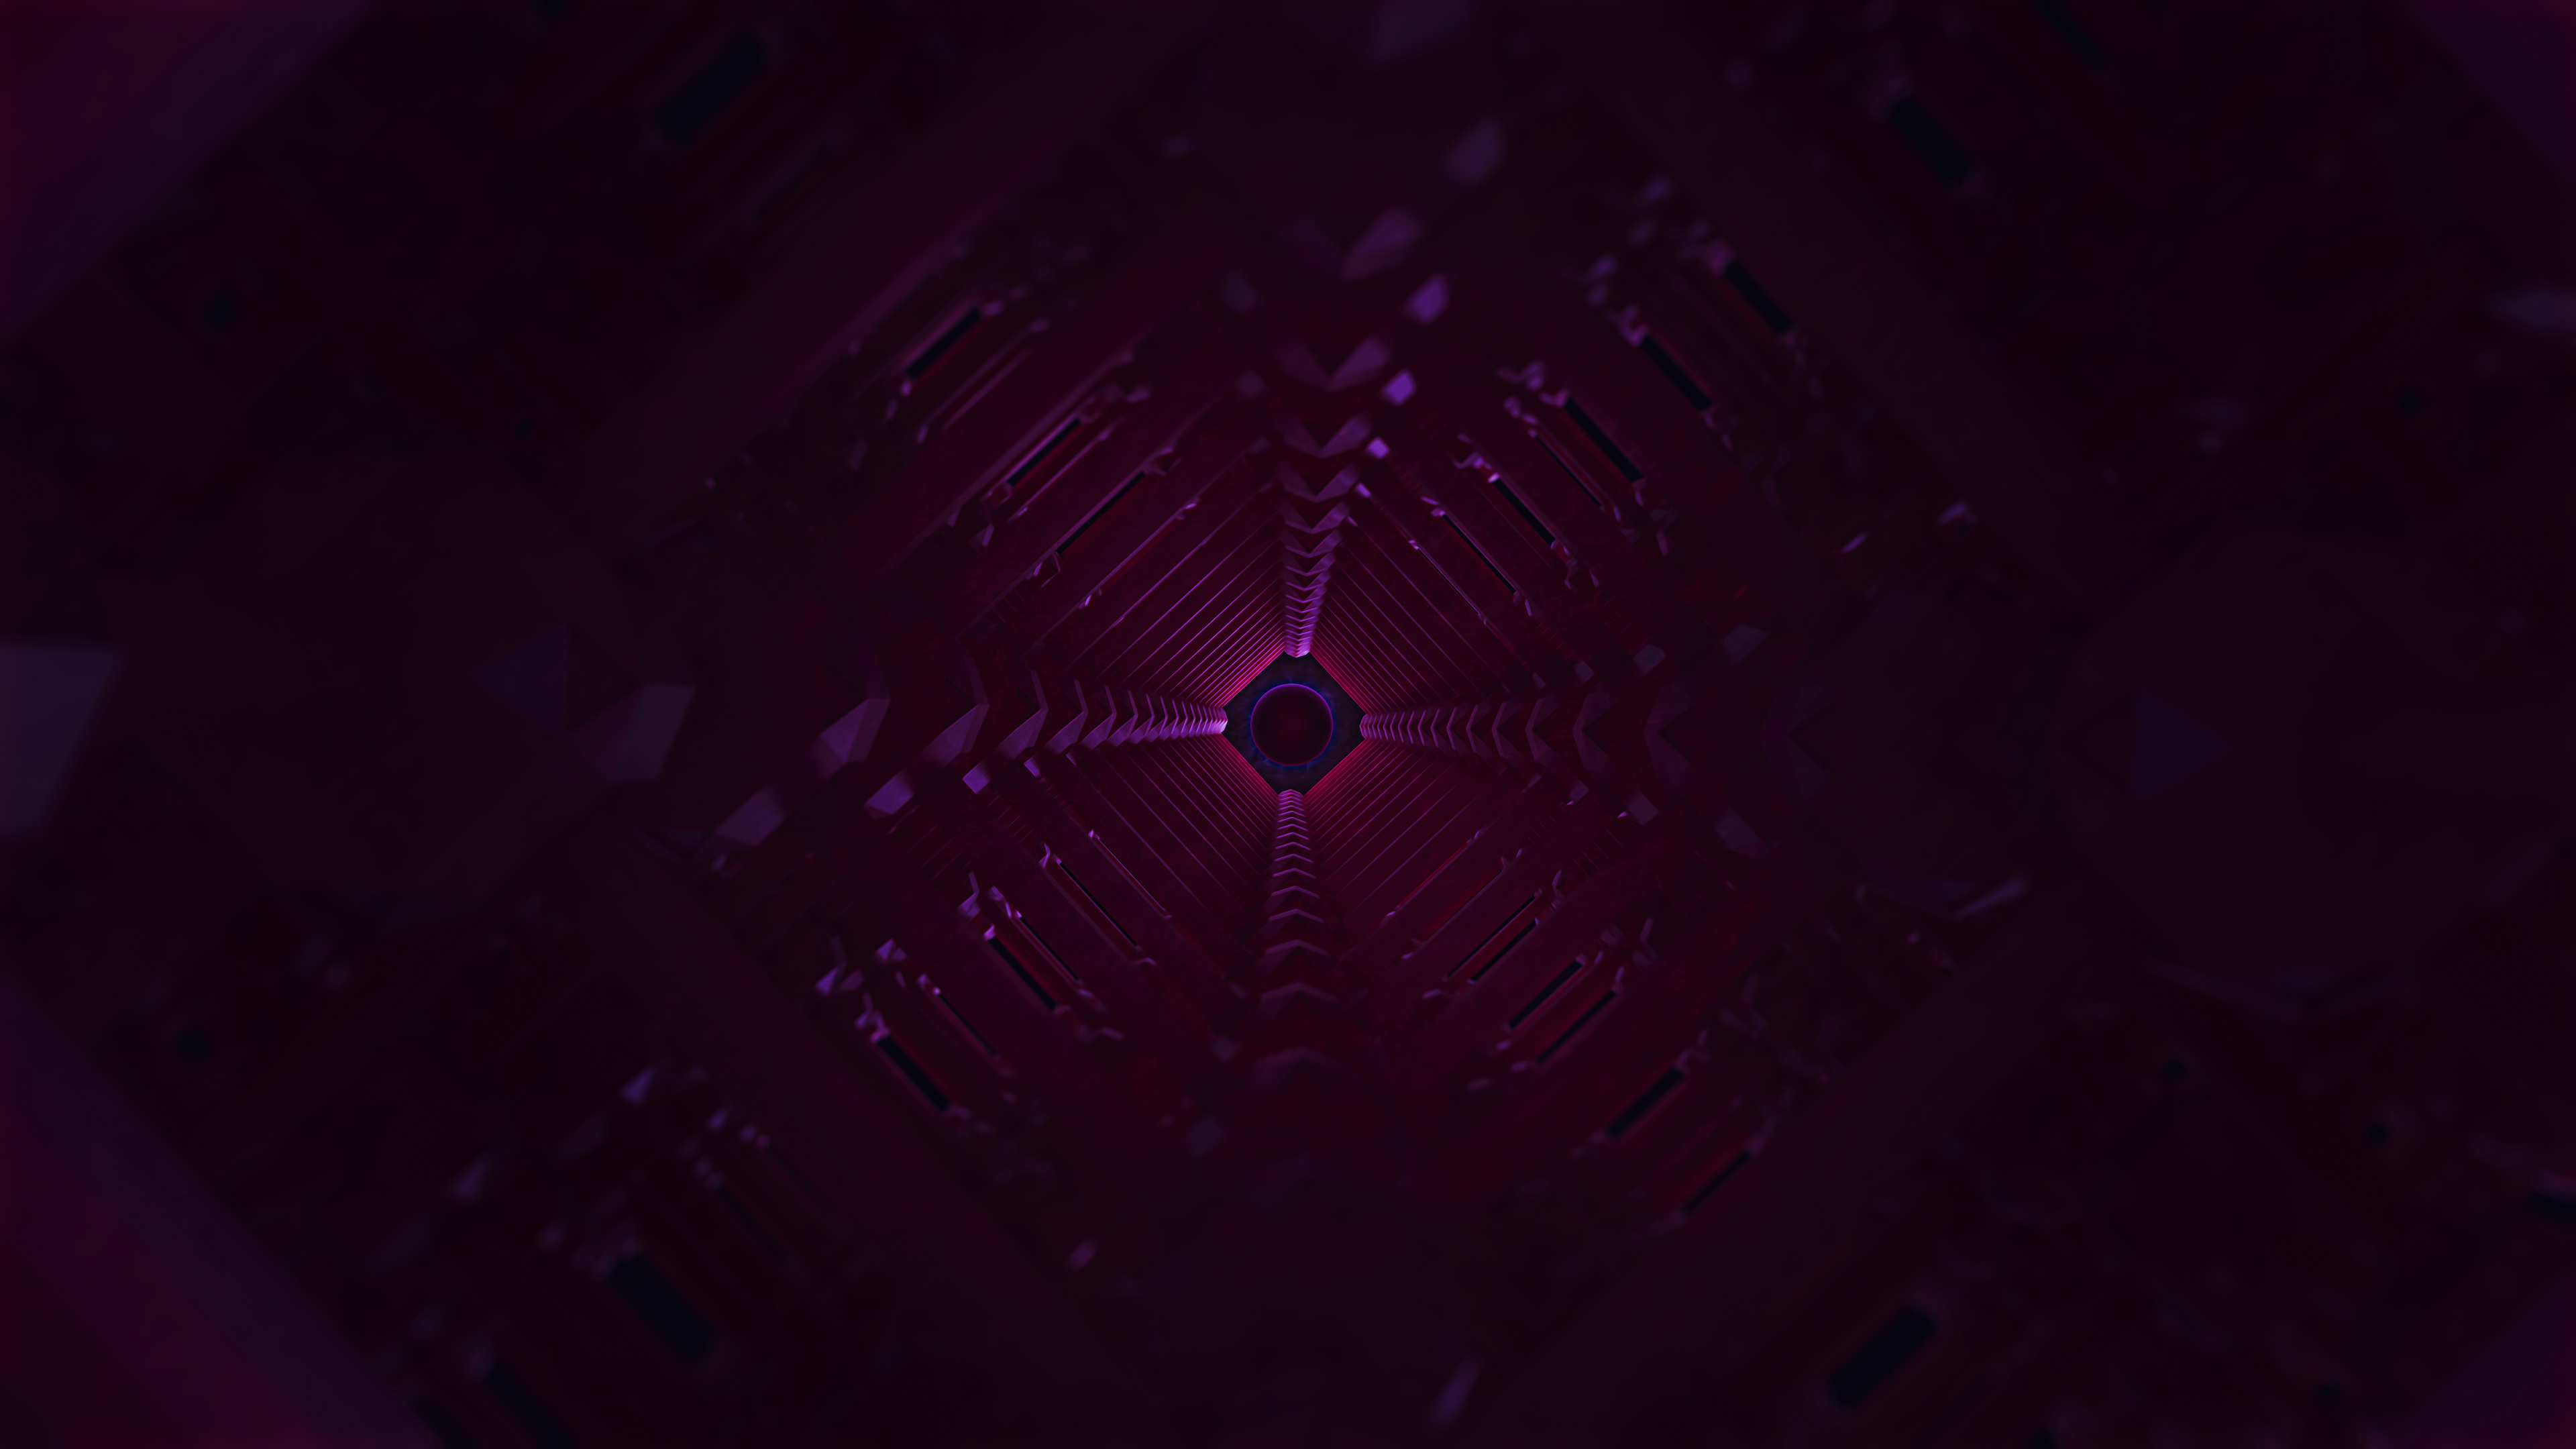 3D Abstract Abstract Render Digital Art 3d Design Shapes Geometry Render In Shapes Magenta Glowing T 3840x2160